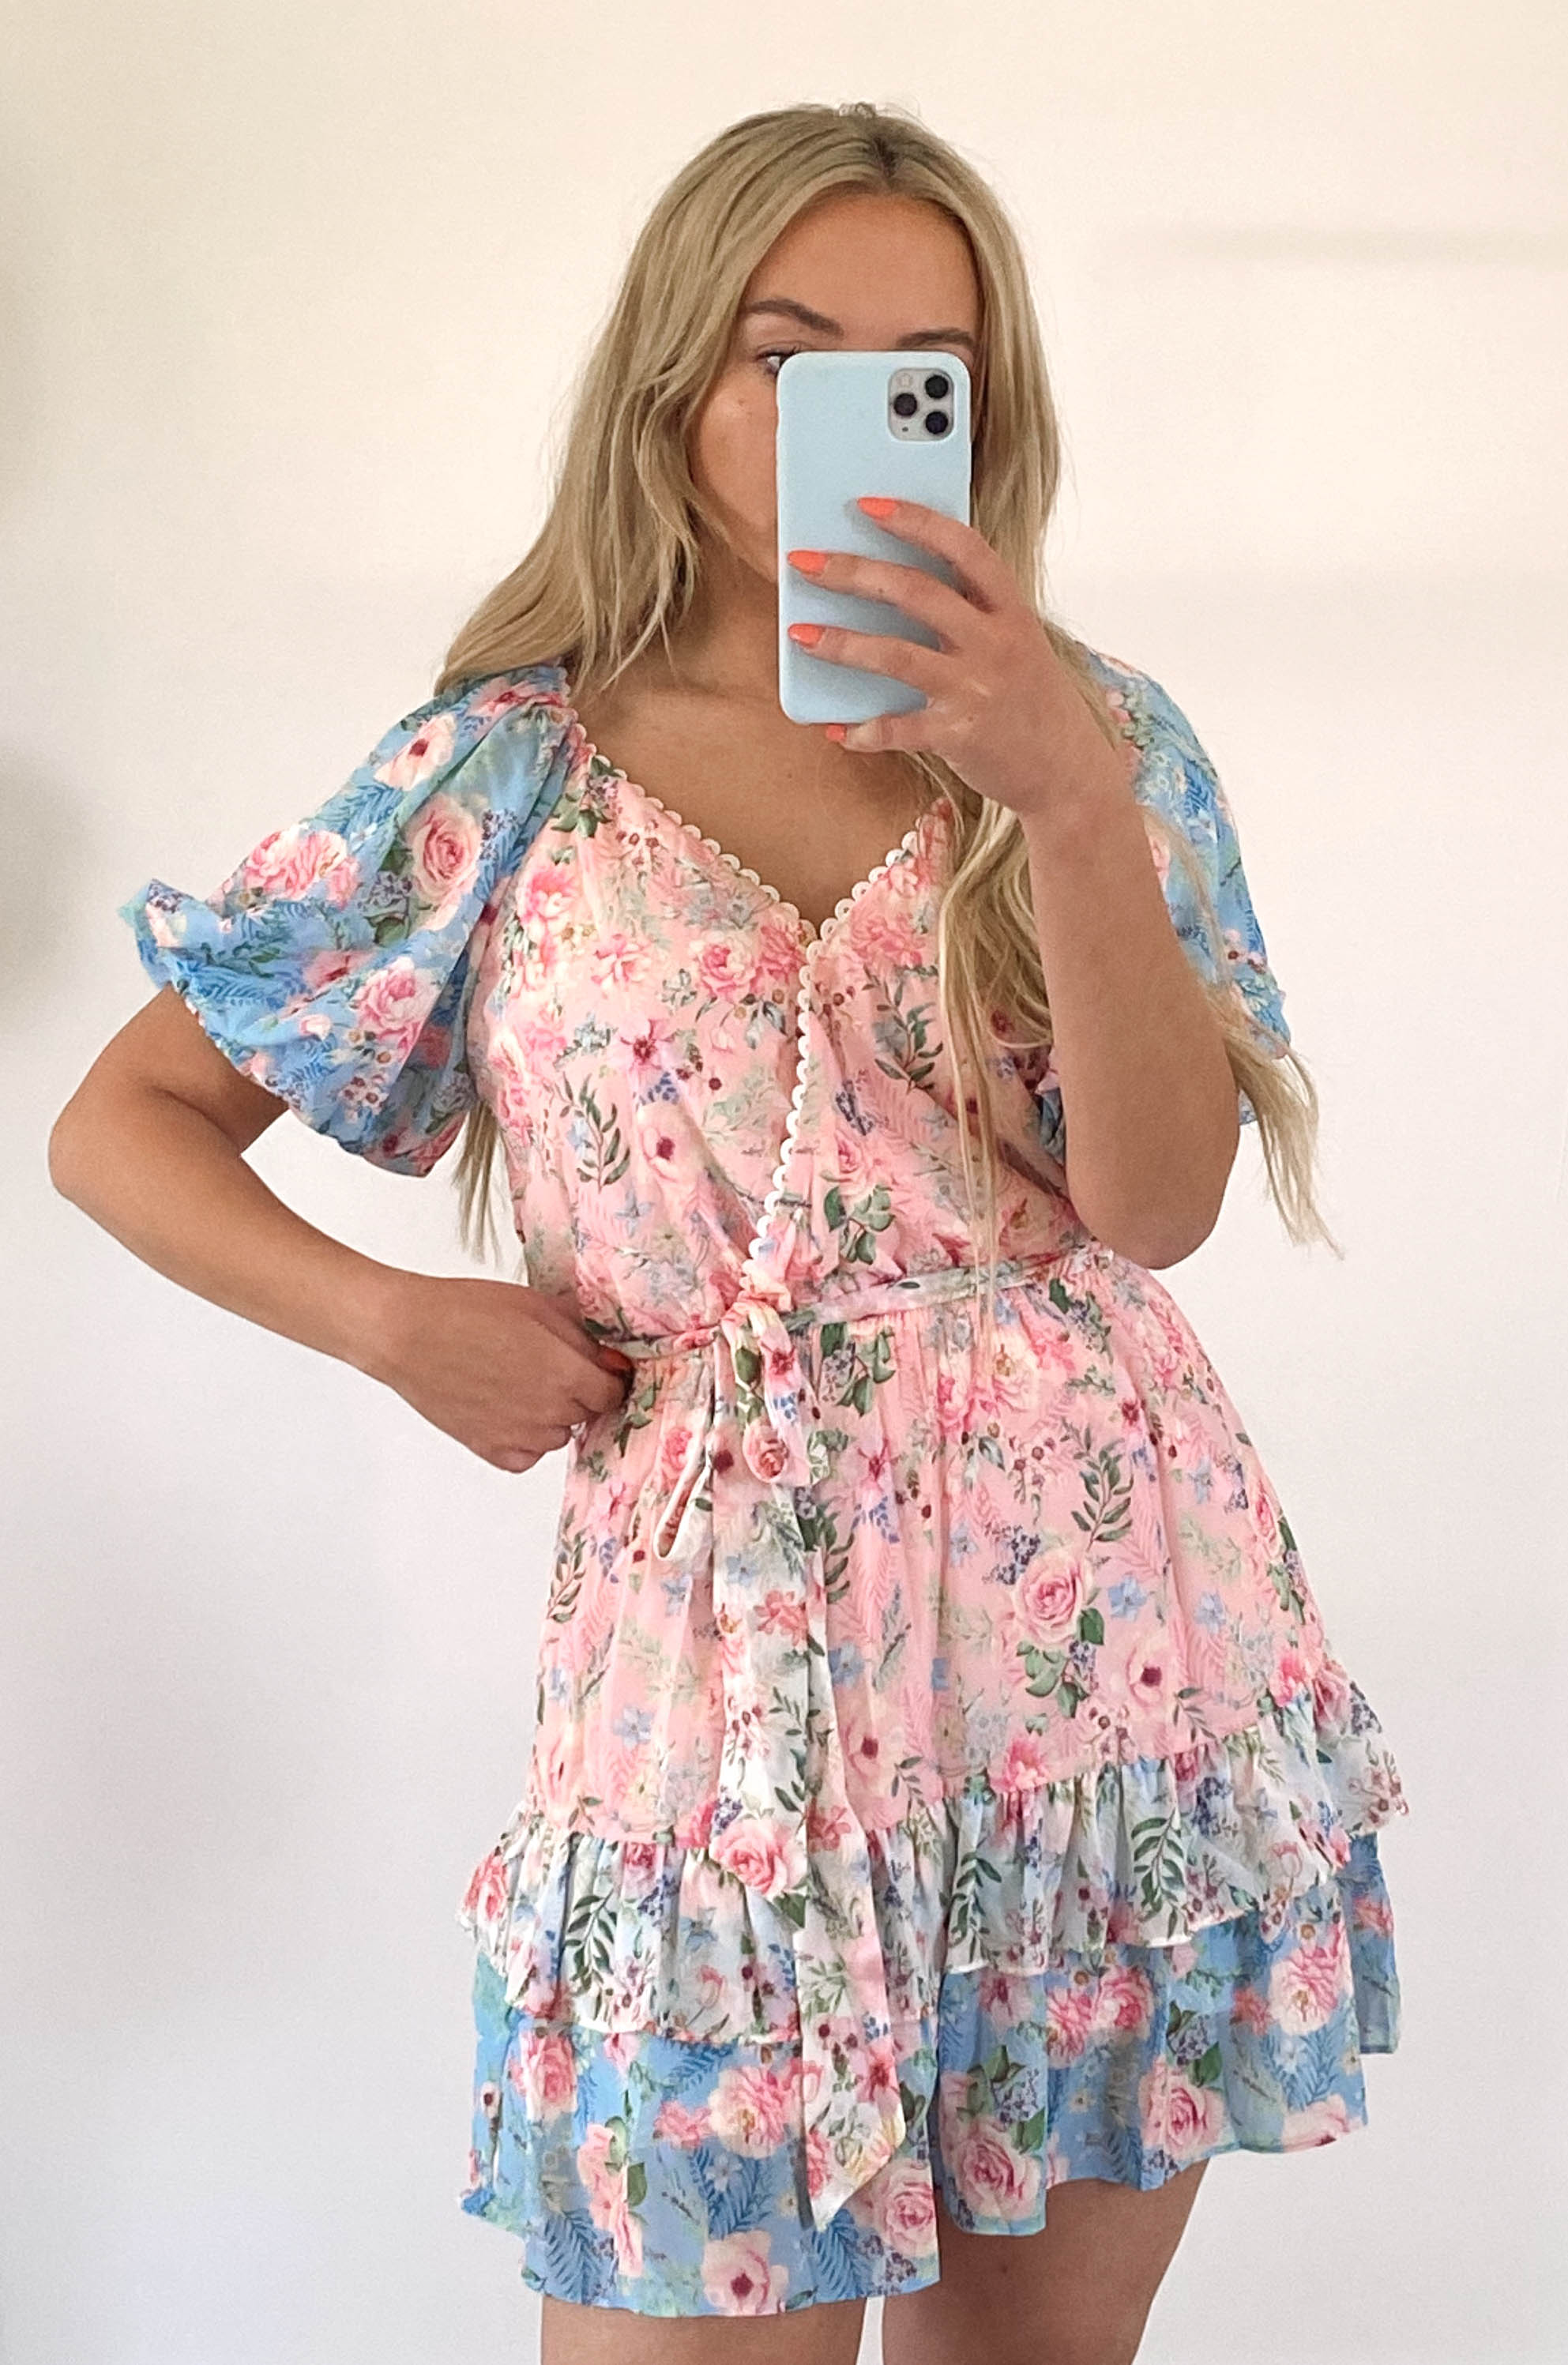 stylish girly feminine floral print dress with puff sleeves